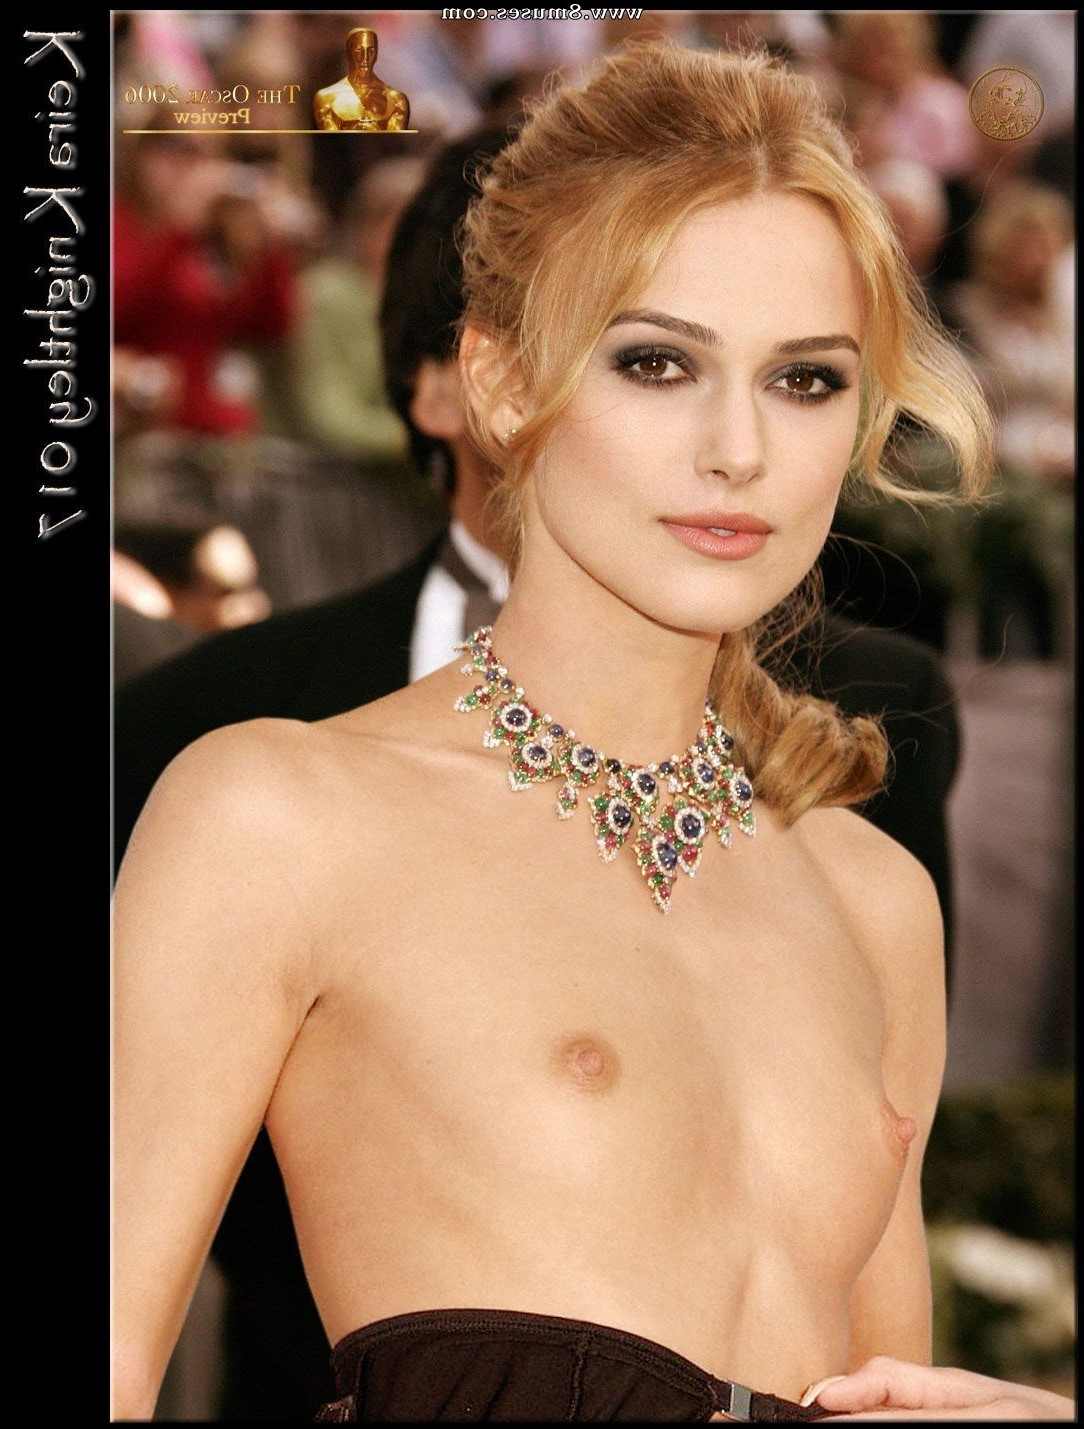 Fake-Celebrities-Sex-Pictures/Keira-Knightley Keira_Knightley__8muses_-_Sex_and_Porn_Comics_161.jpg